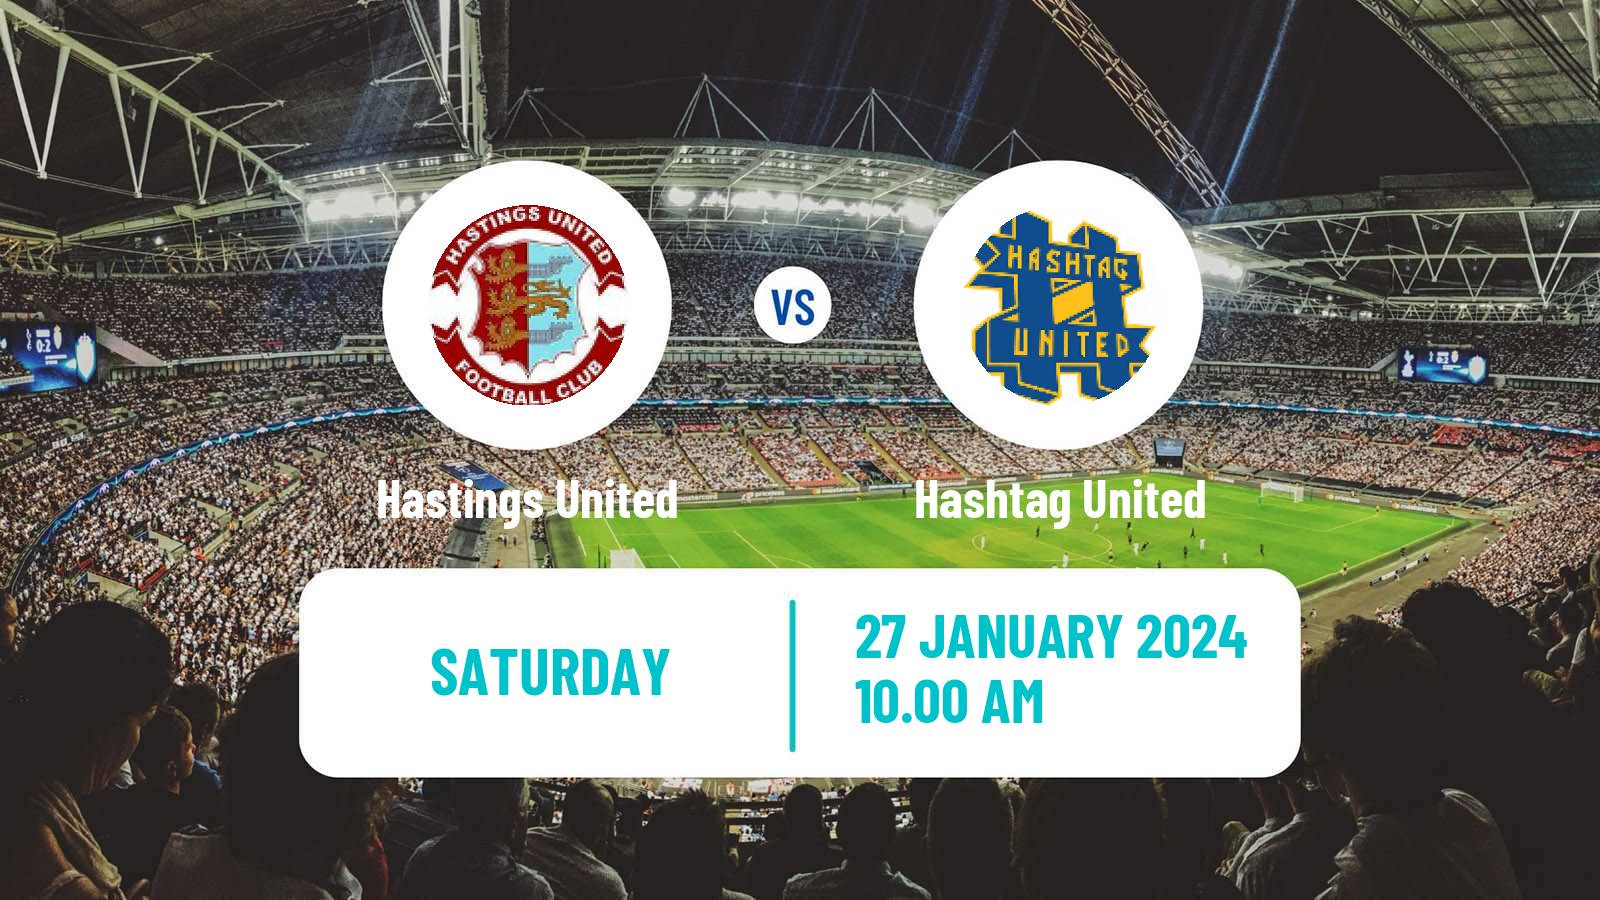 Soccer English Isthmian League Premier Division Hastings United - Hashtag United